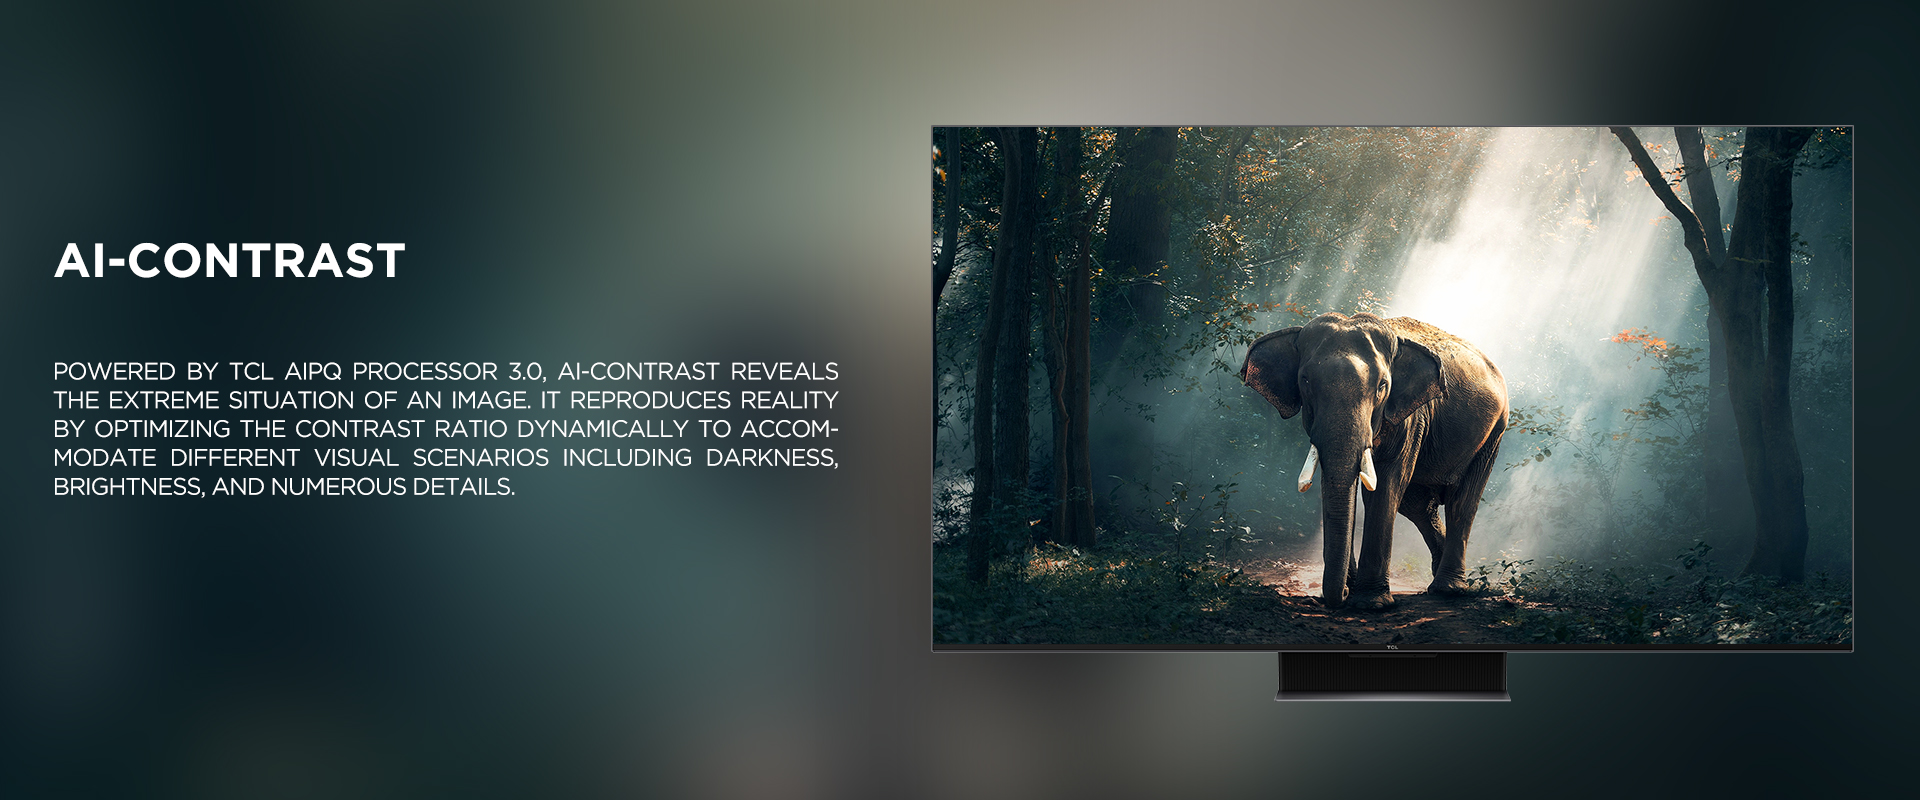 Ai-CONTRAST - Powered by TCL AiPQ Processor 3.0, Ai-Contrast reveals the extreme situation of an image. It reproduces reality by optimizing the contrast ratio dynamically to accommodate different visual scenarios including darkness, brightness, and numerous details.